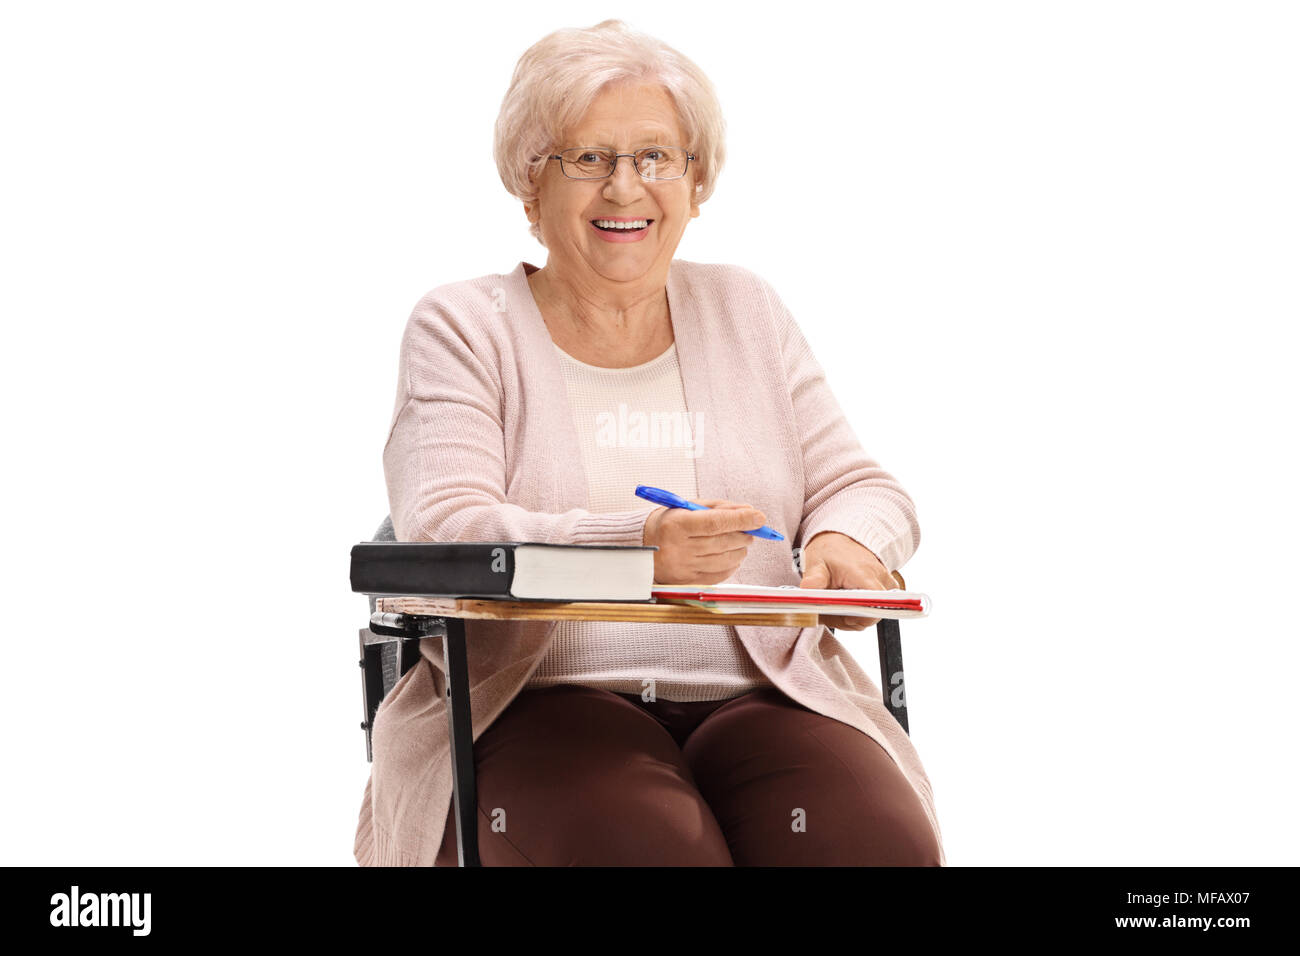 Mature woman sitting in a school chair and smiling isolated on white background Stock Photo